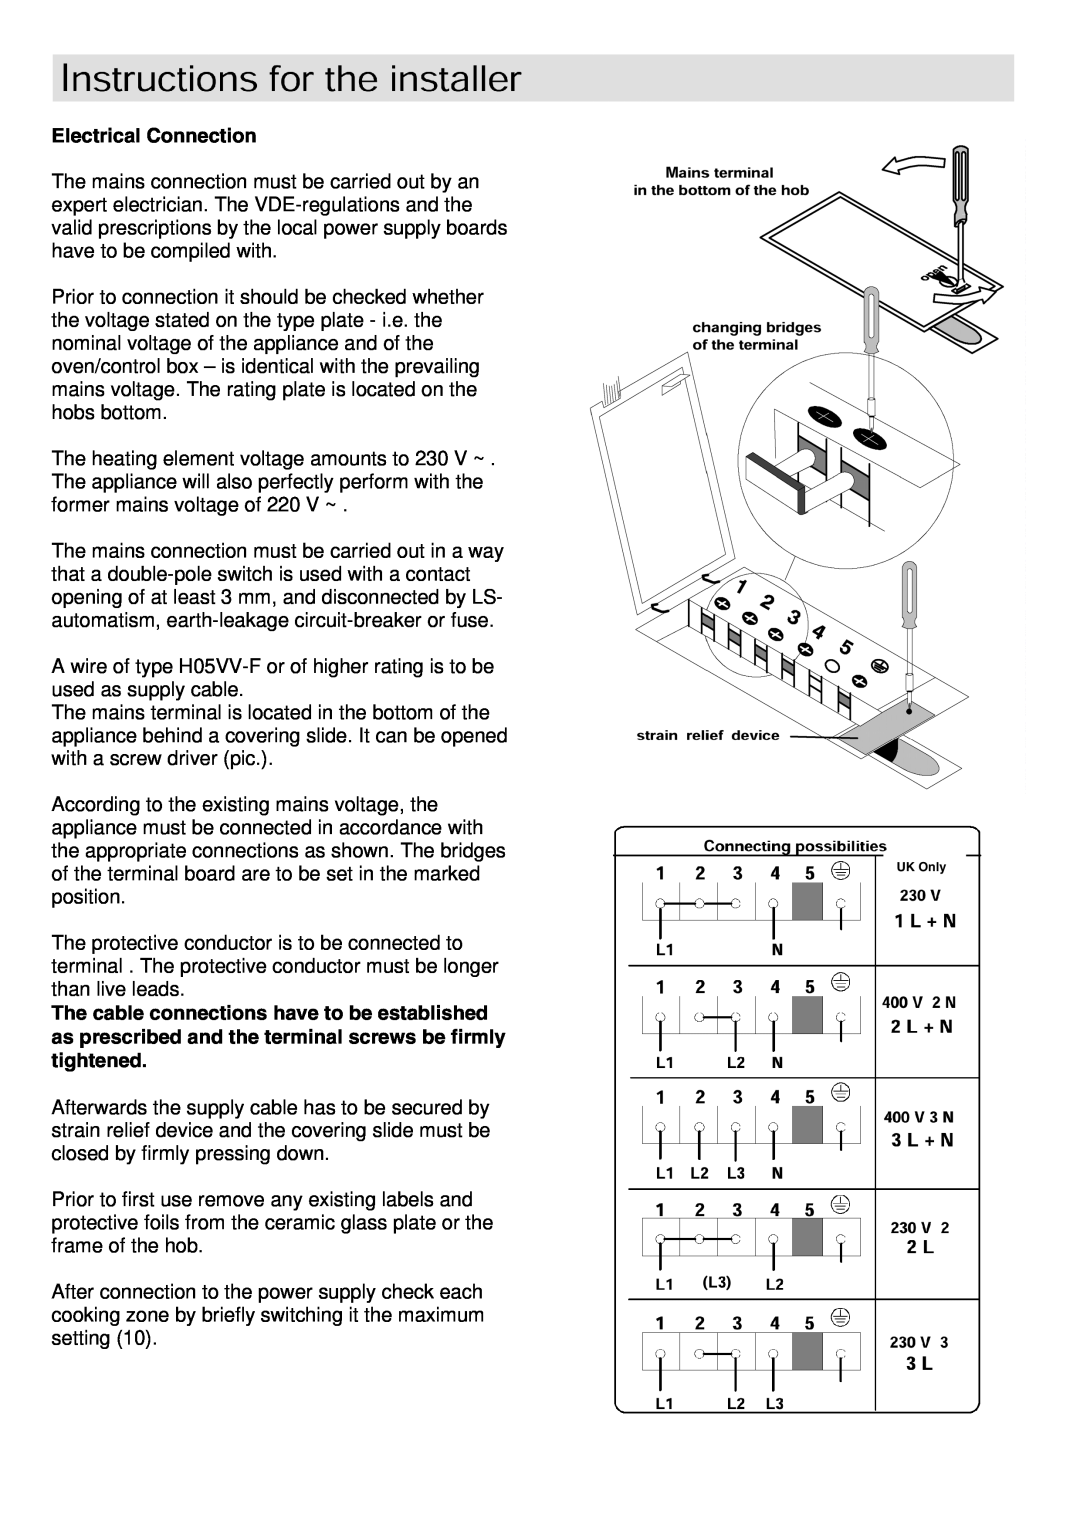 Zanussi ZKF641 installation instructions Electrical Connection, UK Only 